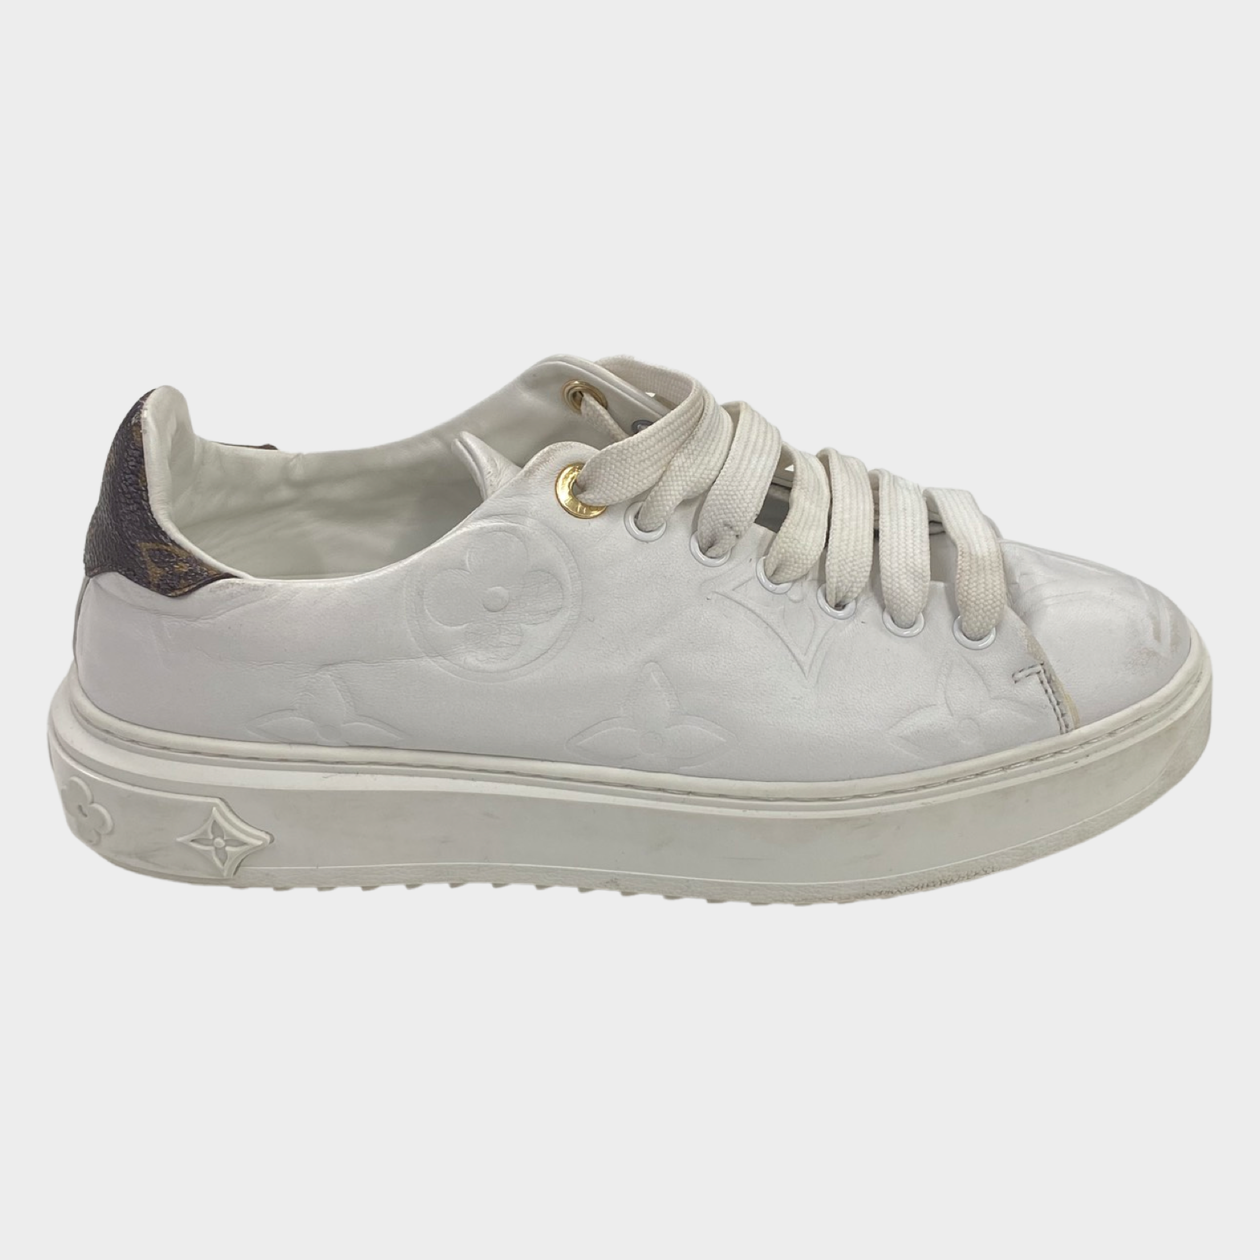 Louis Vuitton - Authenticated Trainer - Leather White for Women, Good Condition